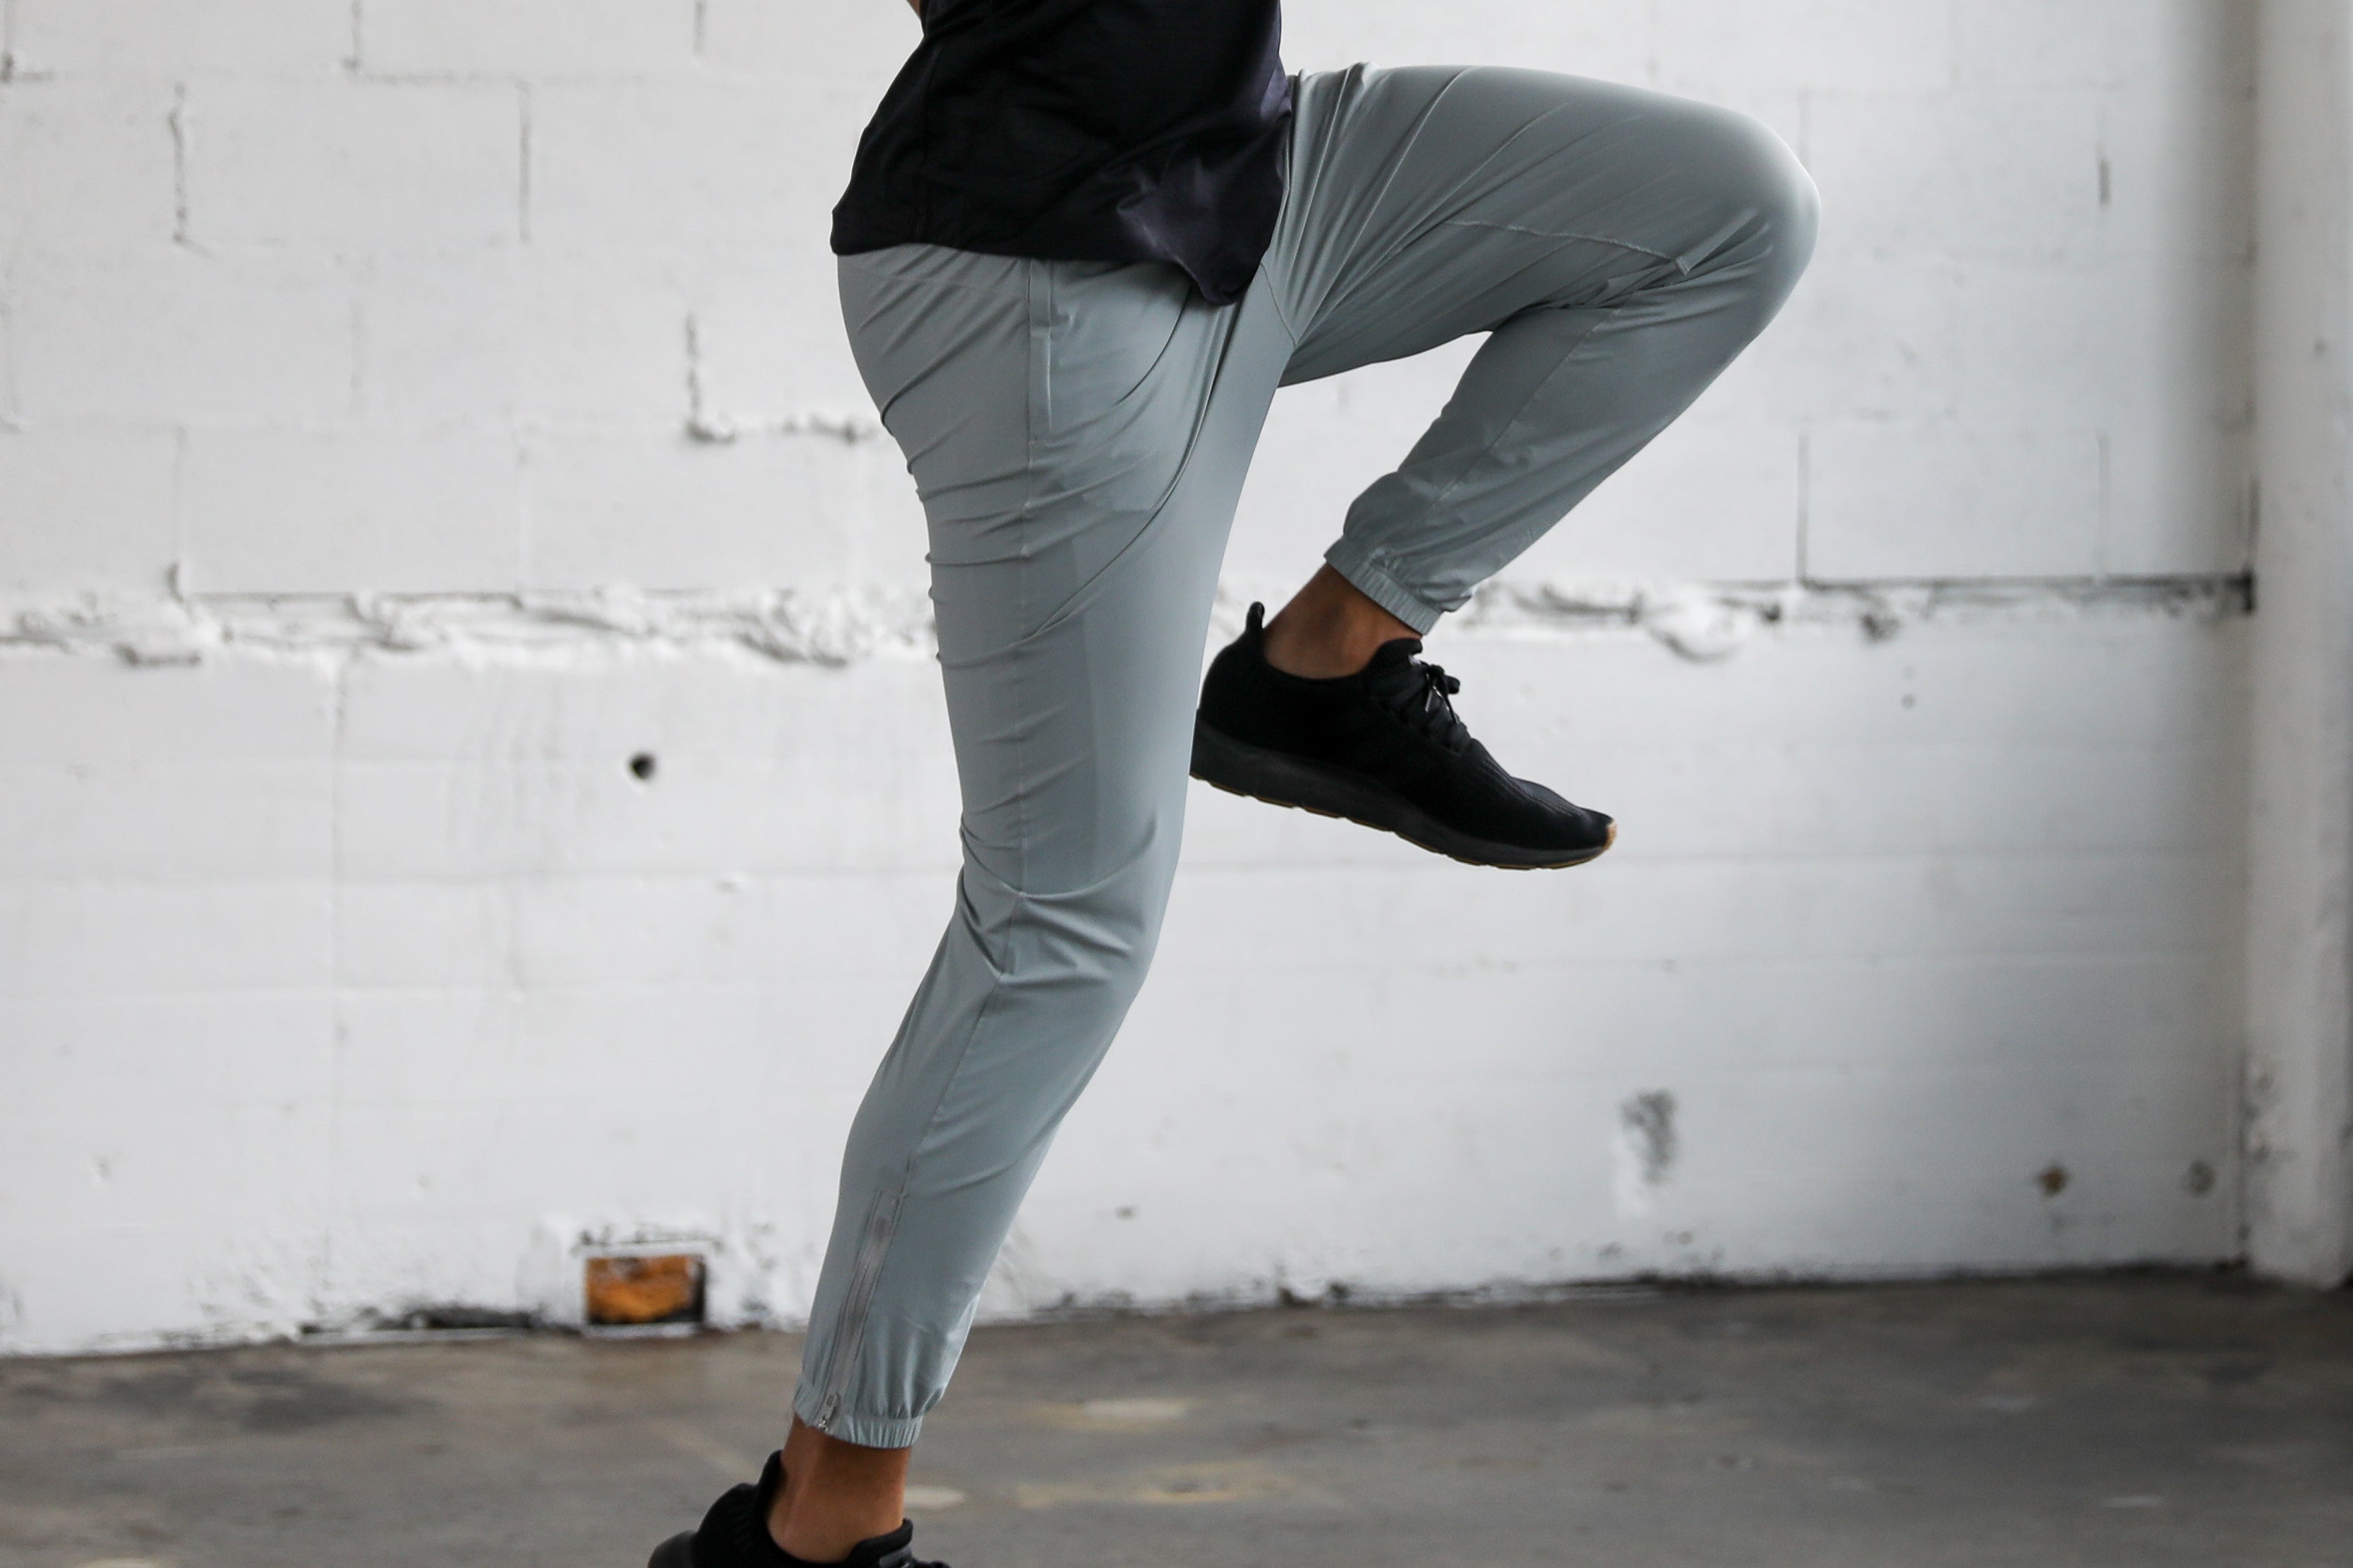 Truwear Joggers: The Best in Comfort and Performance